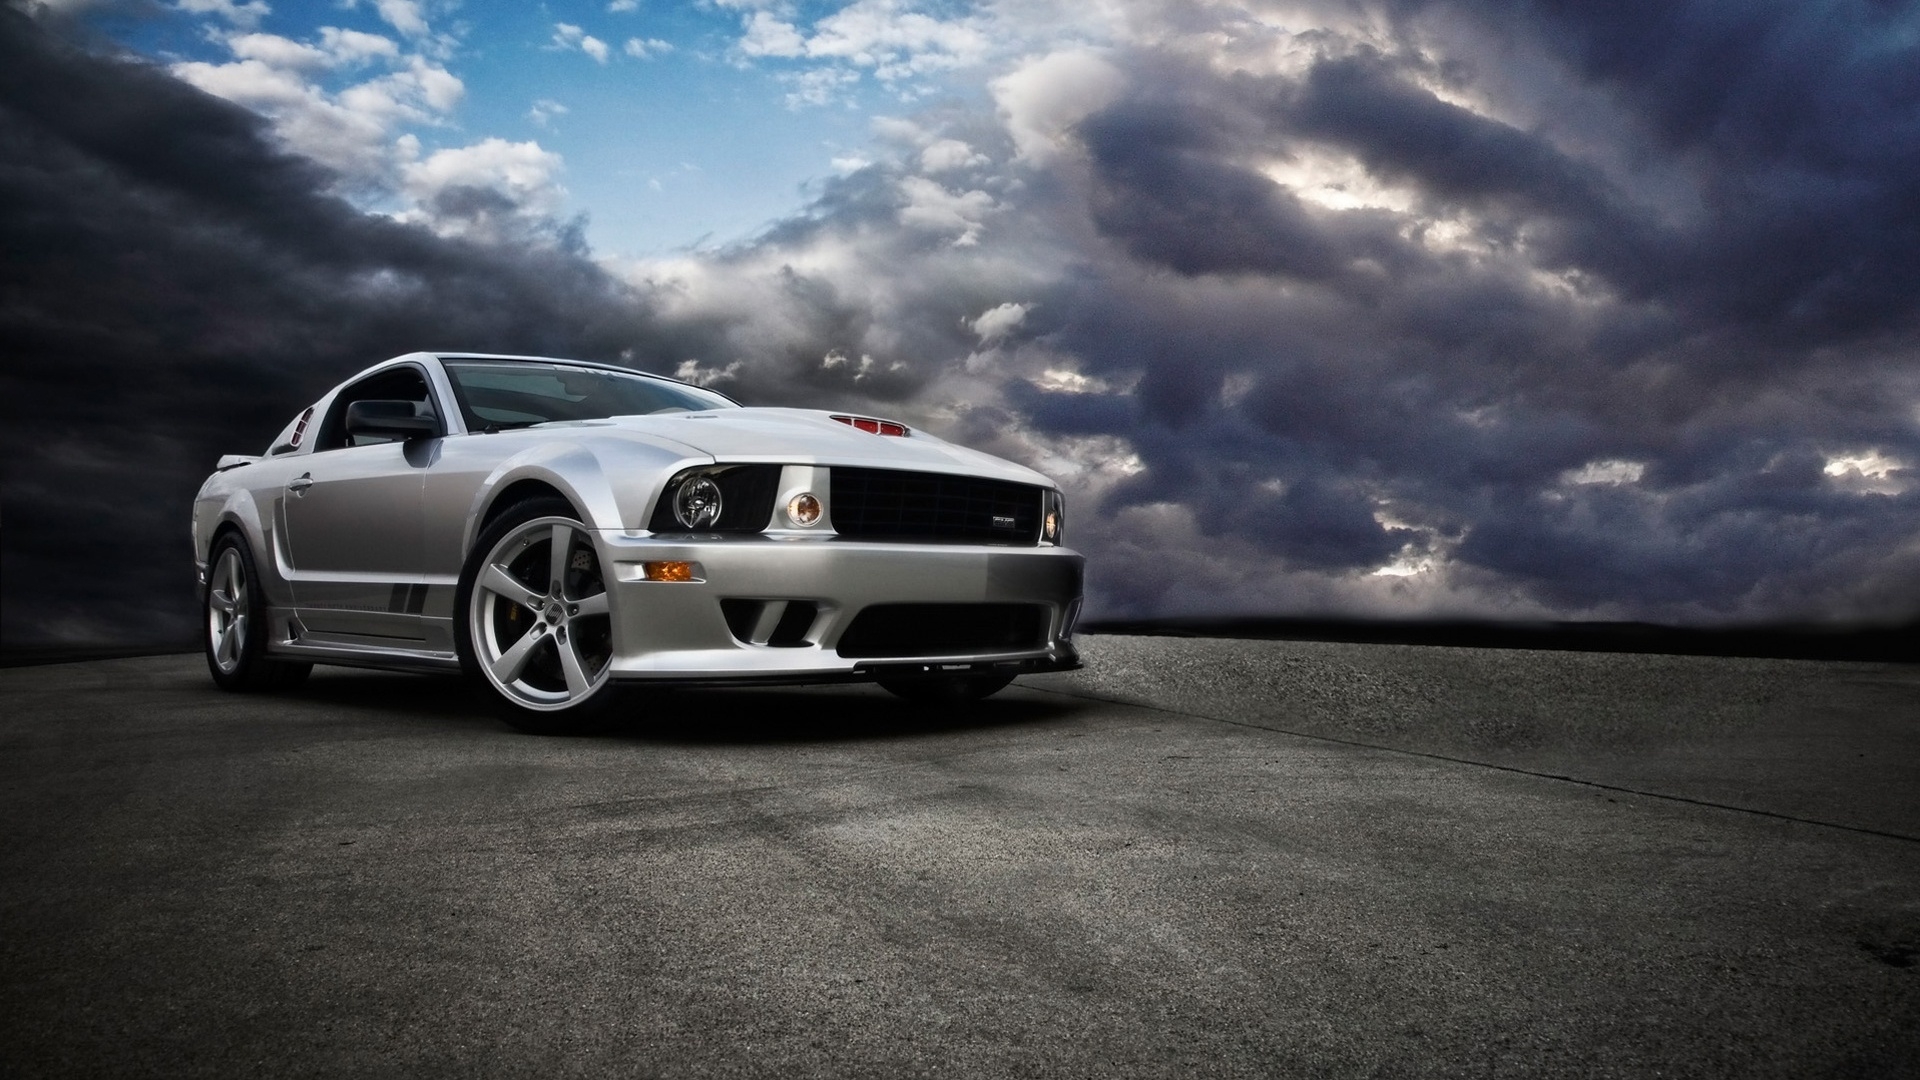 Ford Mustang Tuning for 1920 x 1080 HDTV 1080p resolution